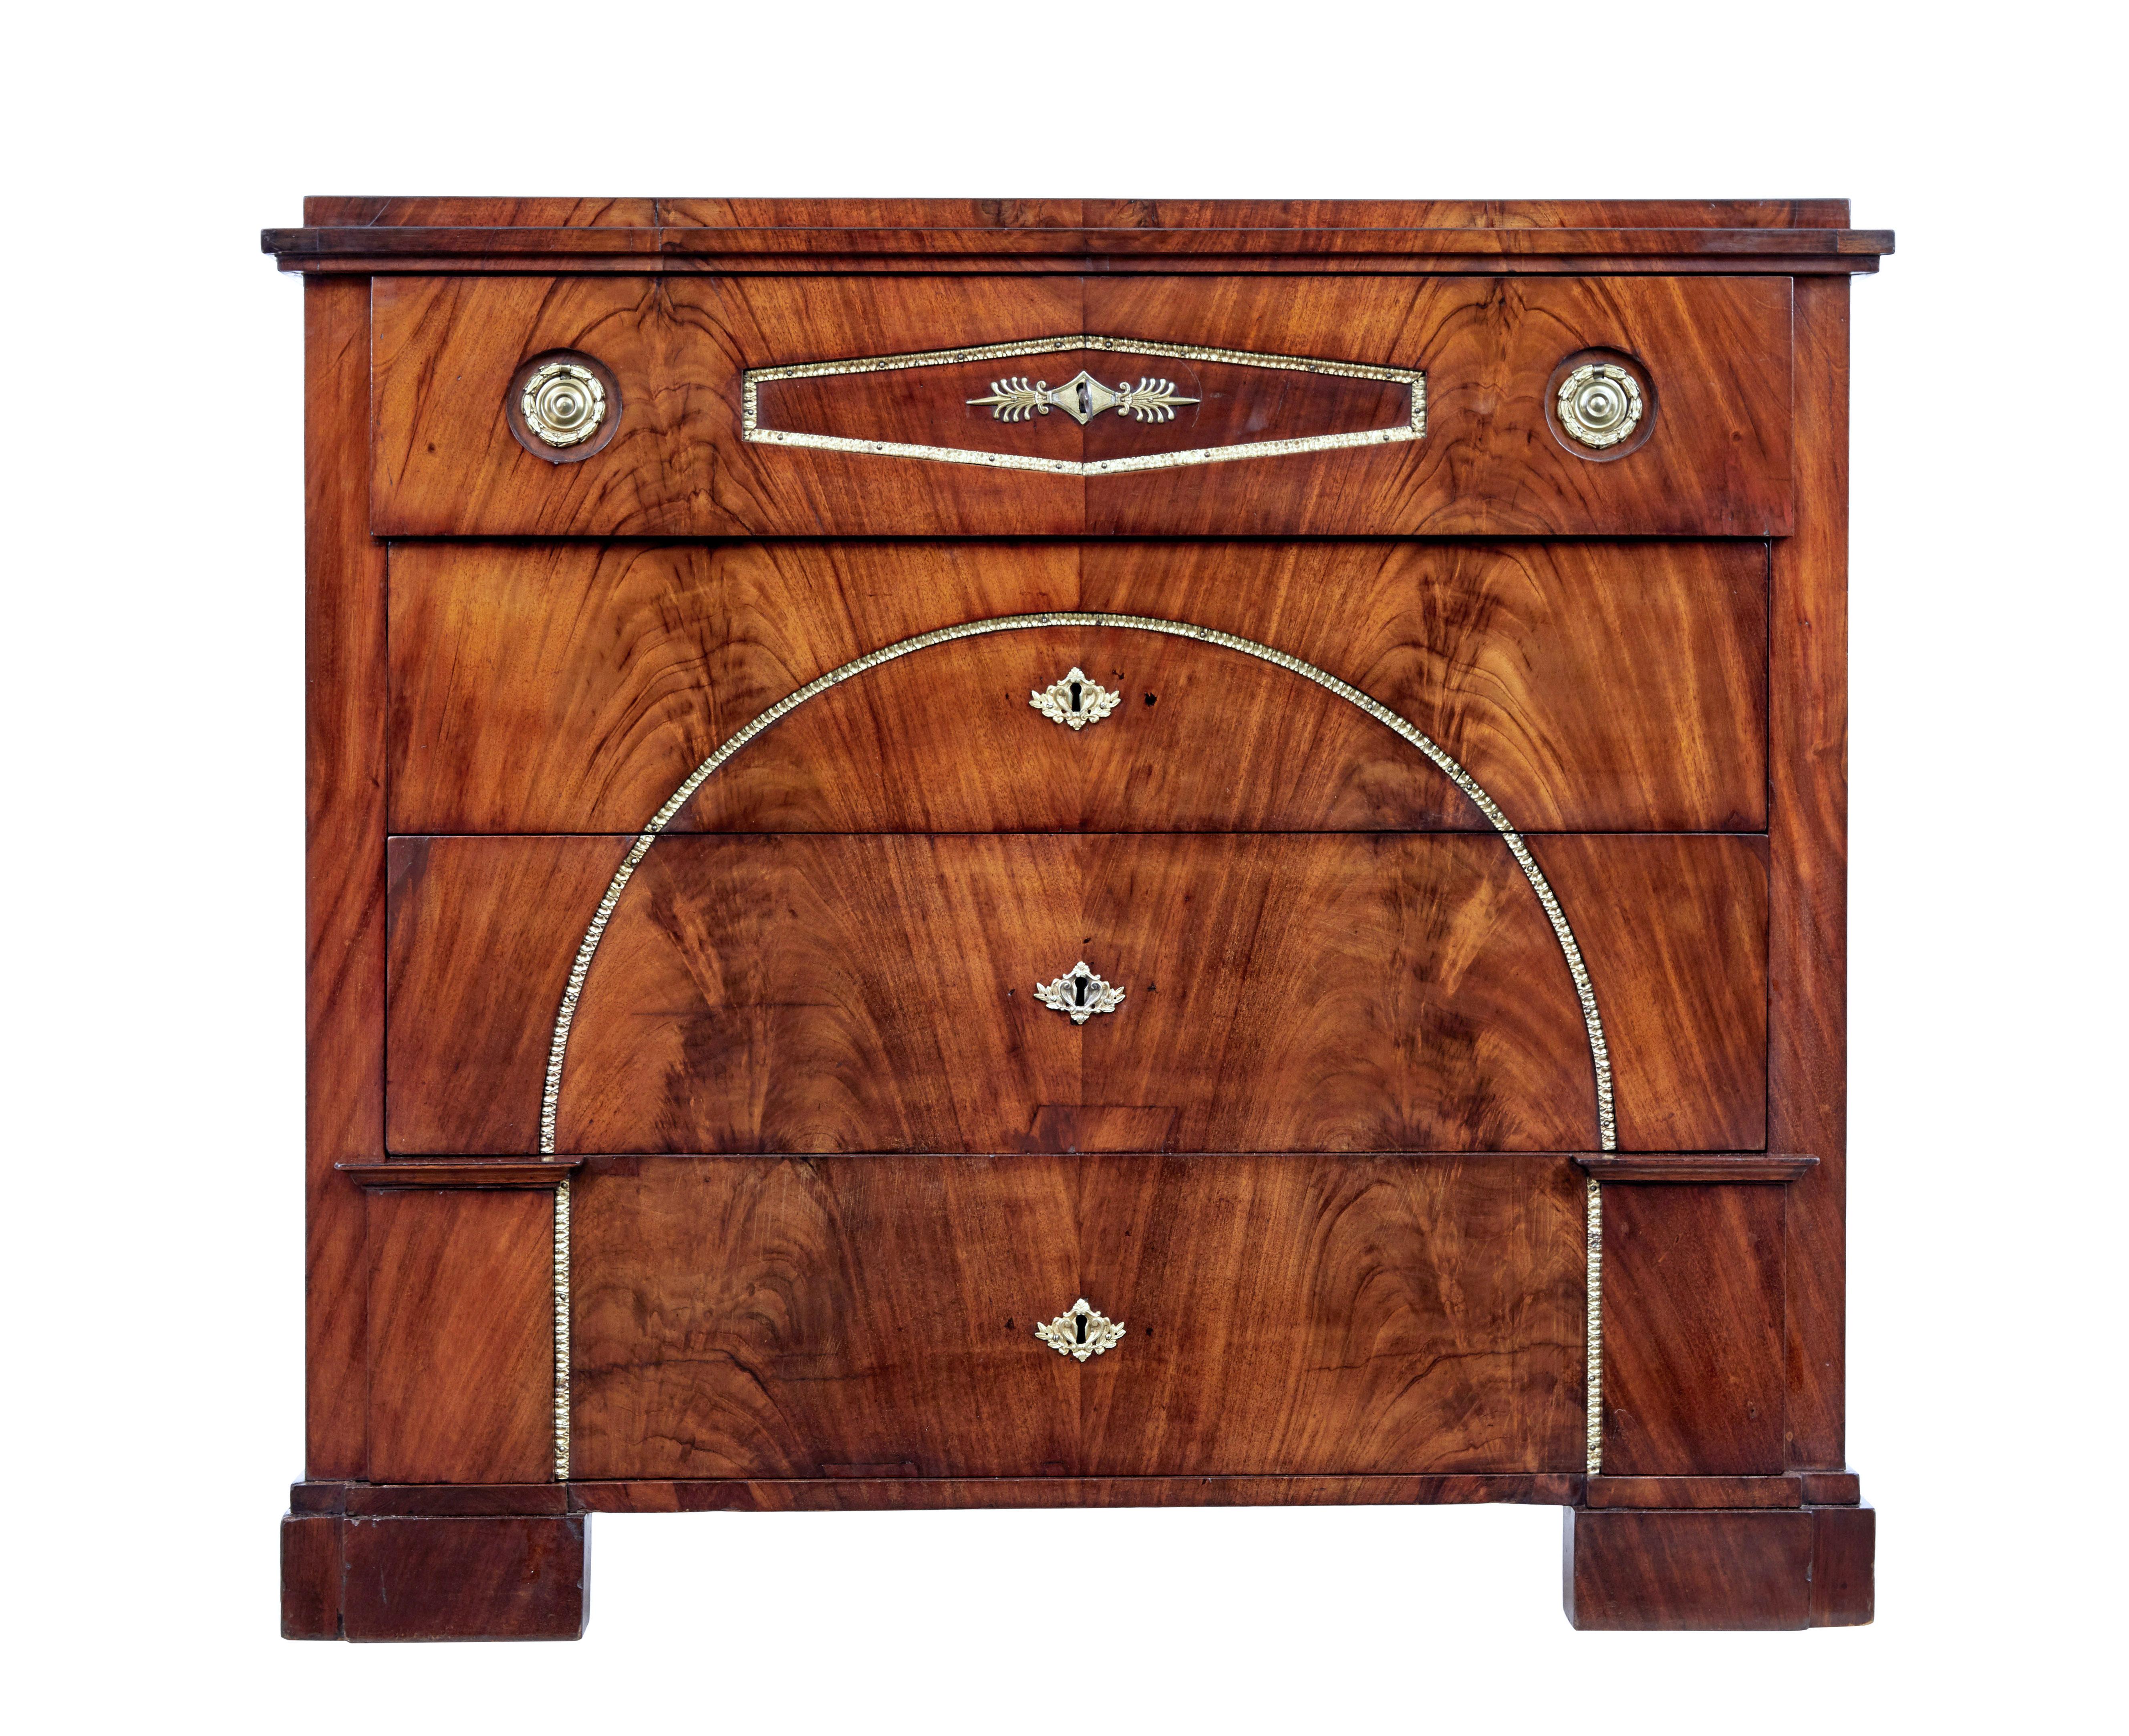 Biedermeier period swedish mahogany secretaire chest of drawers, circa 1810.

Stunning secretaire chest in rich mahogany. 4 drawer chest with architectural elements to the bottom drawer.

Top drawer pulls out and lowers to create a small writing